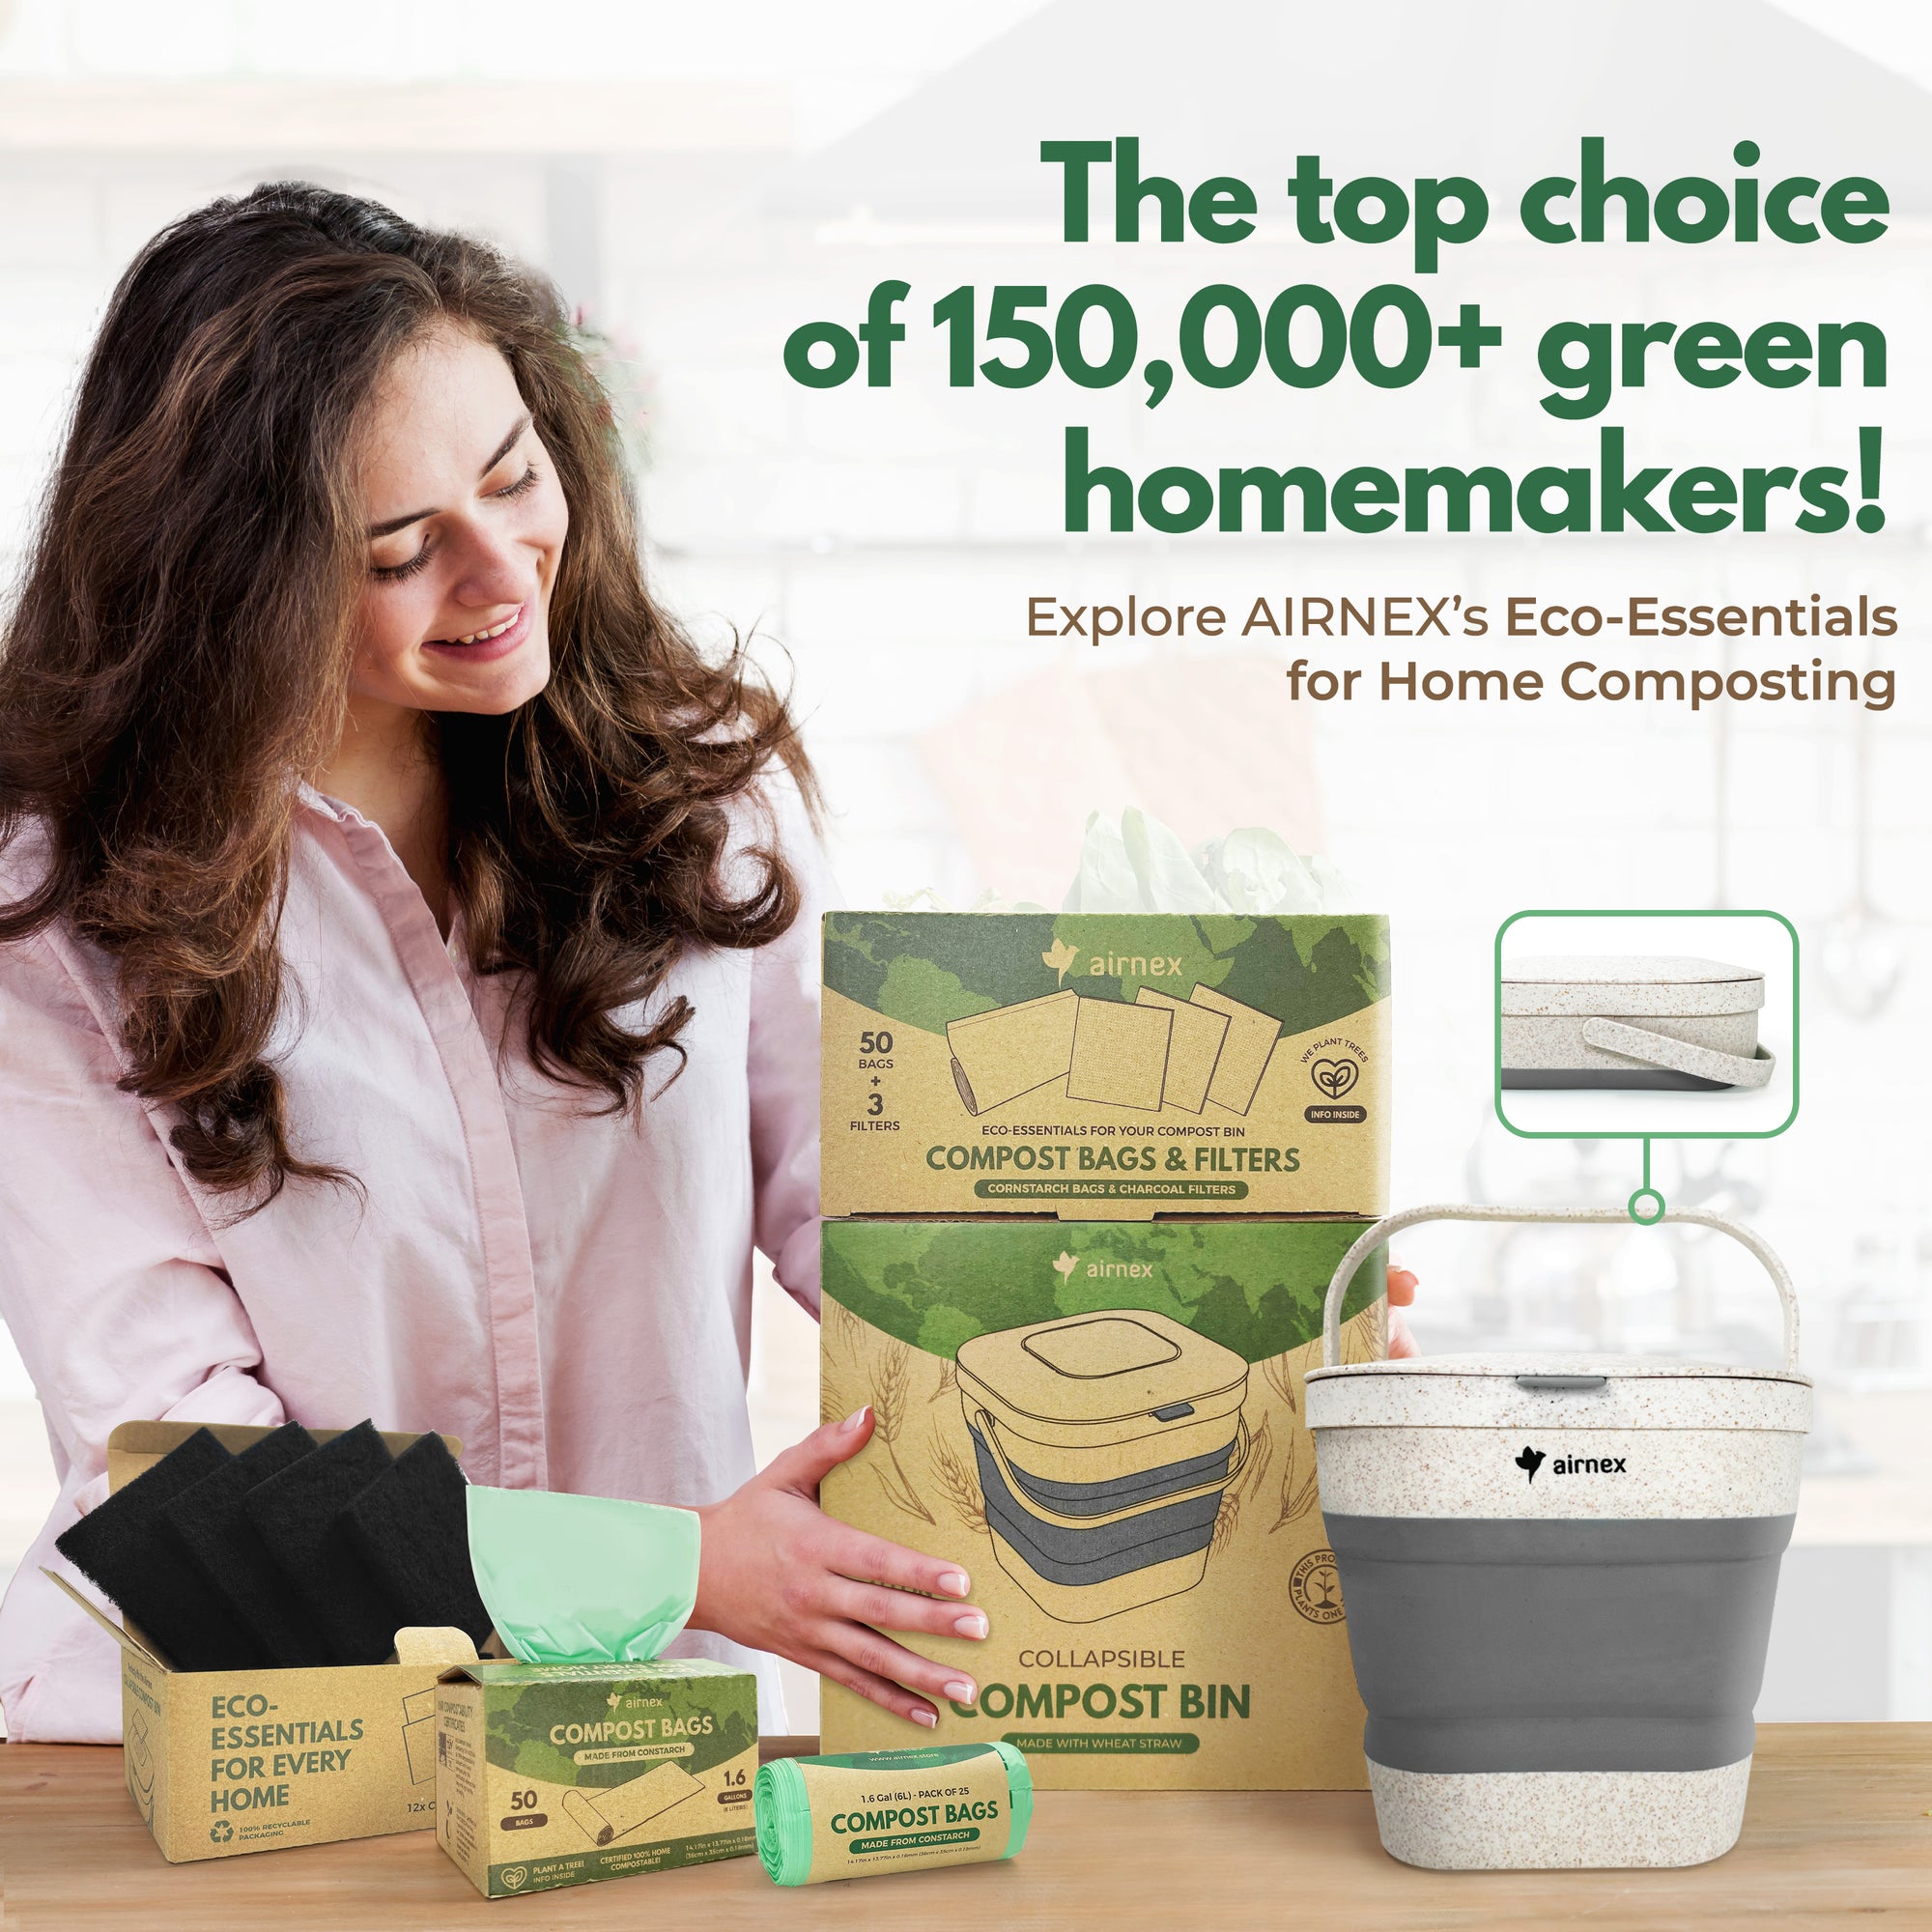 Compostable Trash Bags & Charcoal Filters - Value Pack for Compost Bins